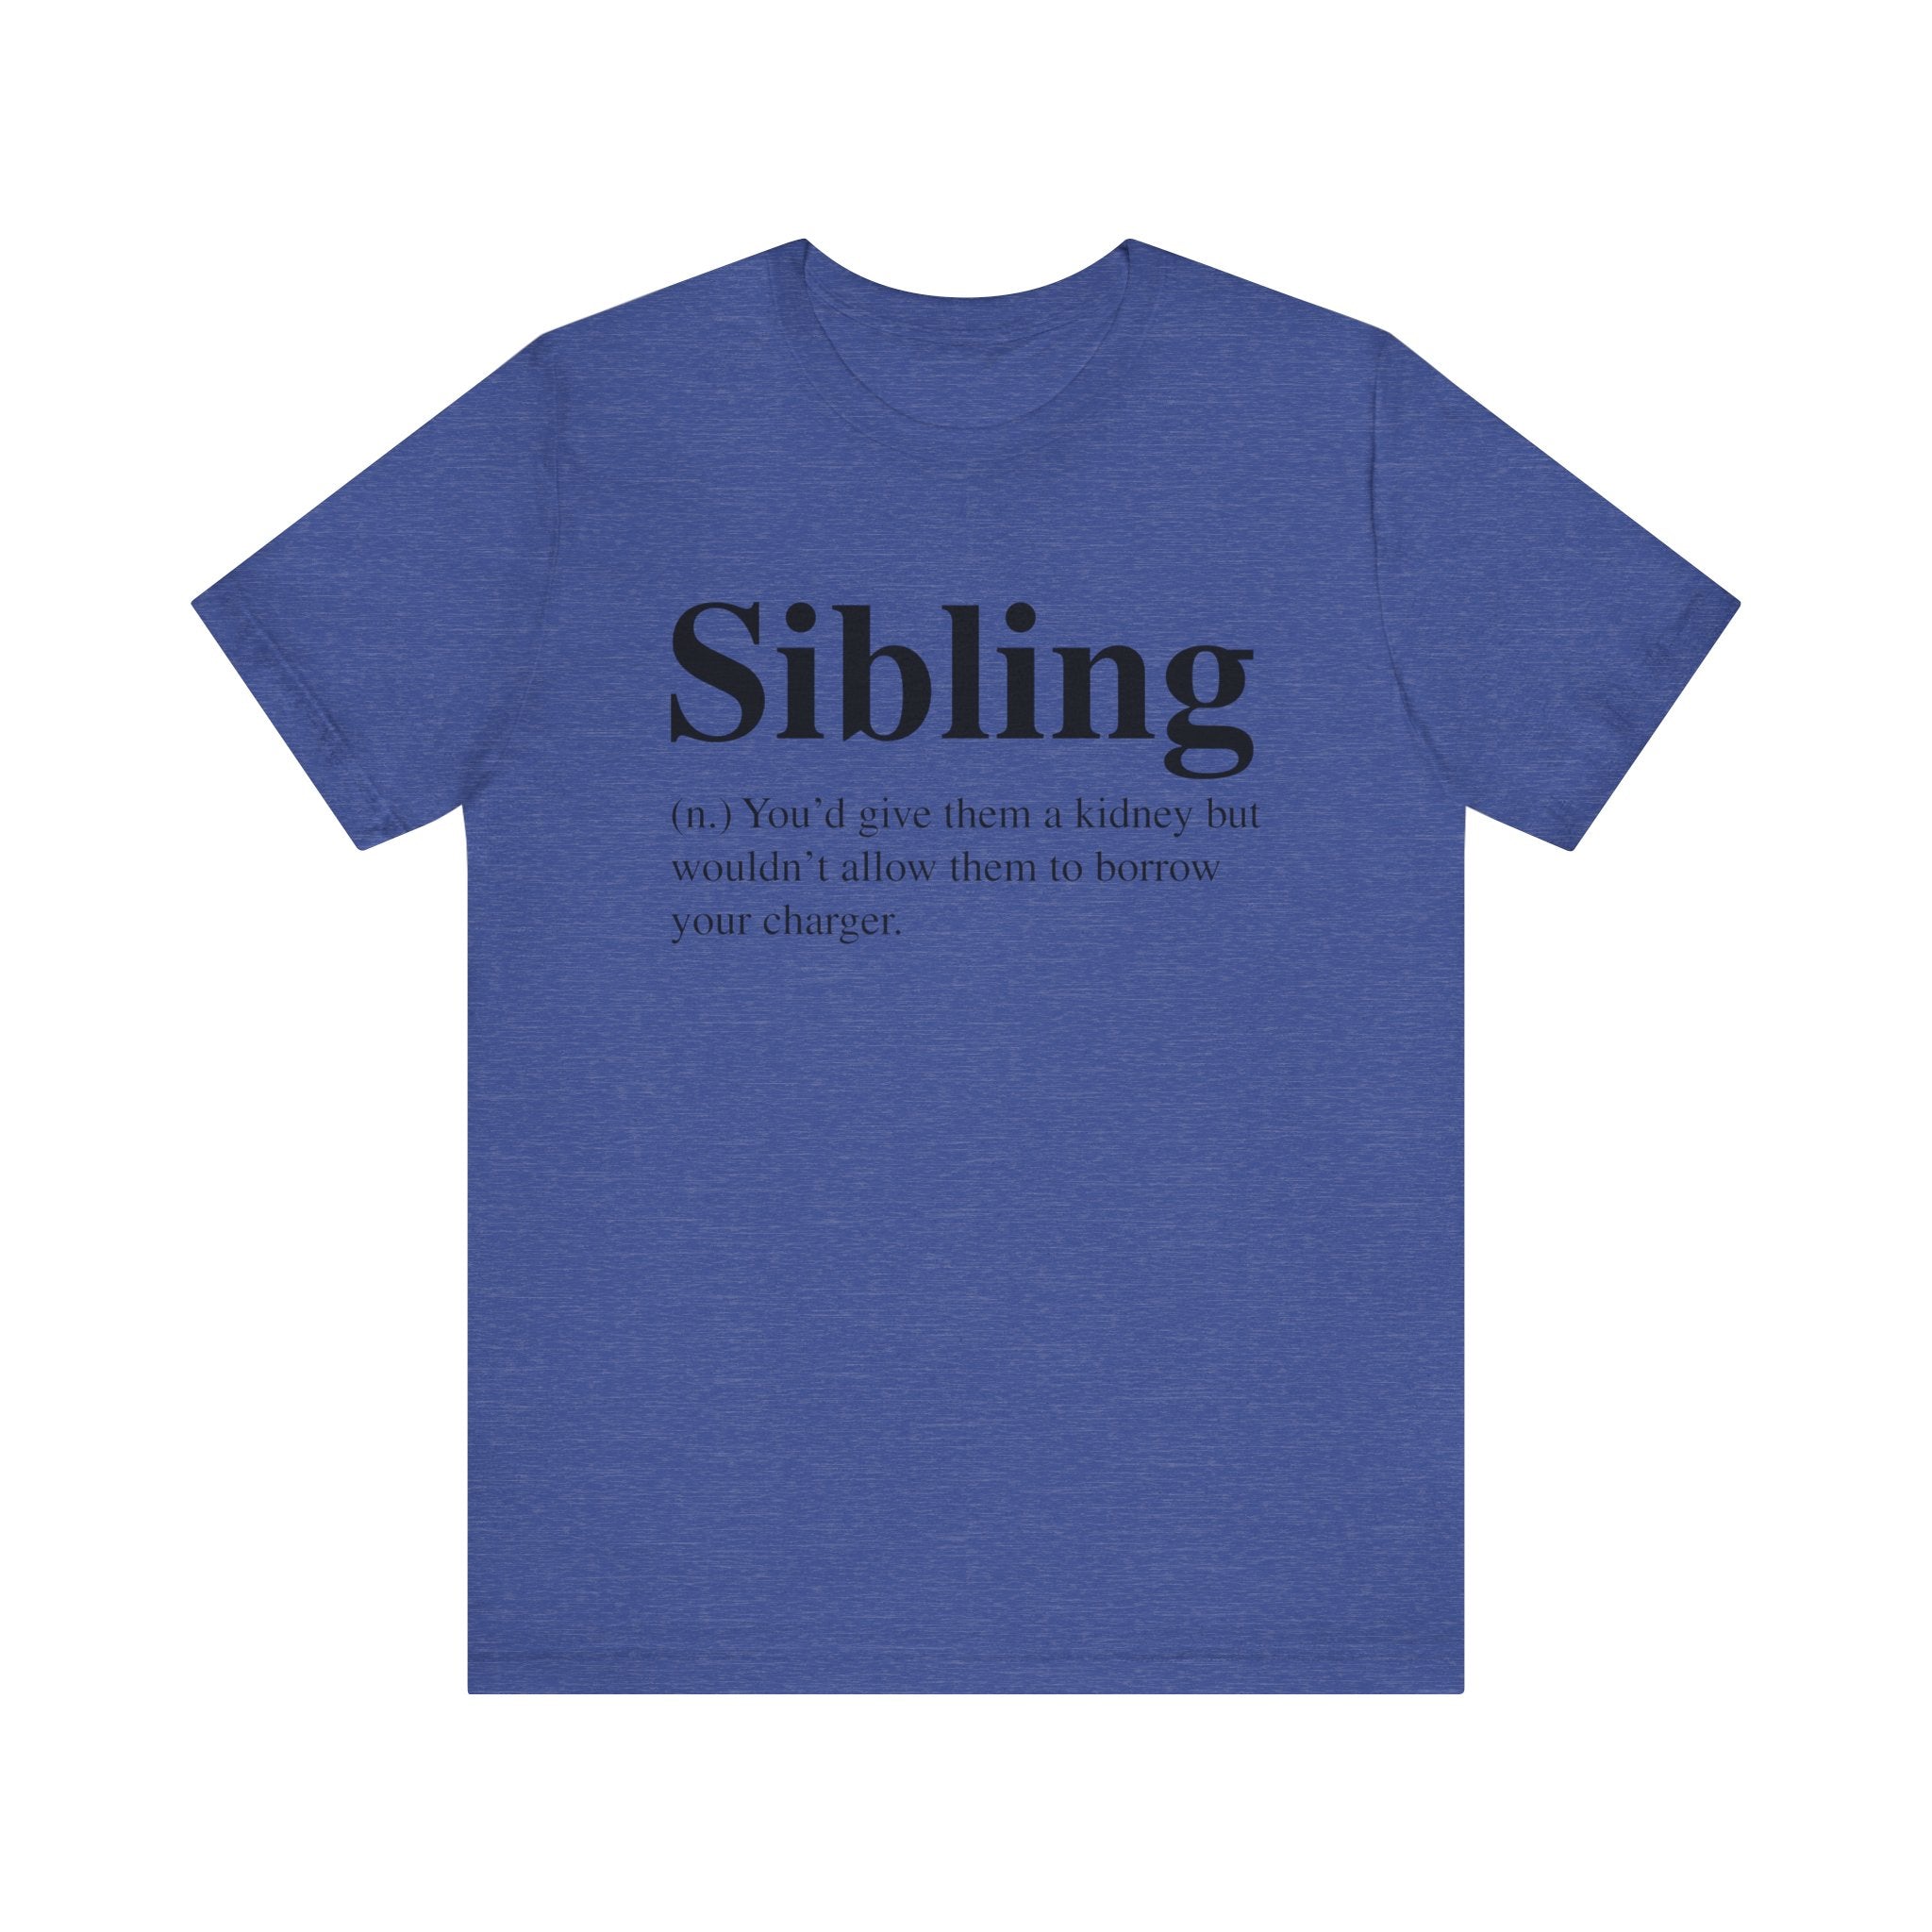 A soft cotton blue sibling t-shirt displaying the word "siblings" and a humorous definition about sacrificing for siblings but not sharing a charger.